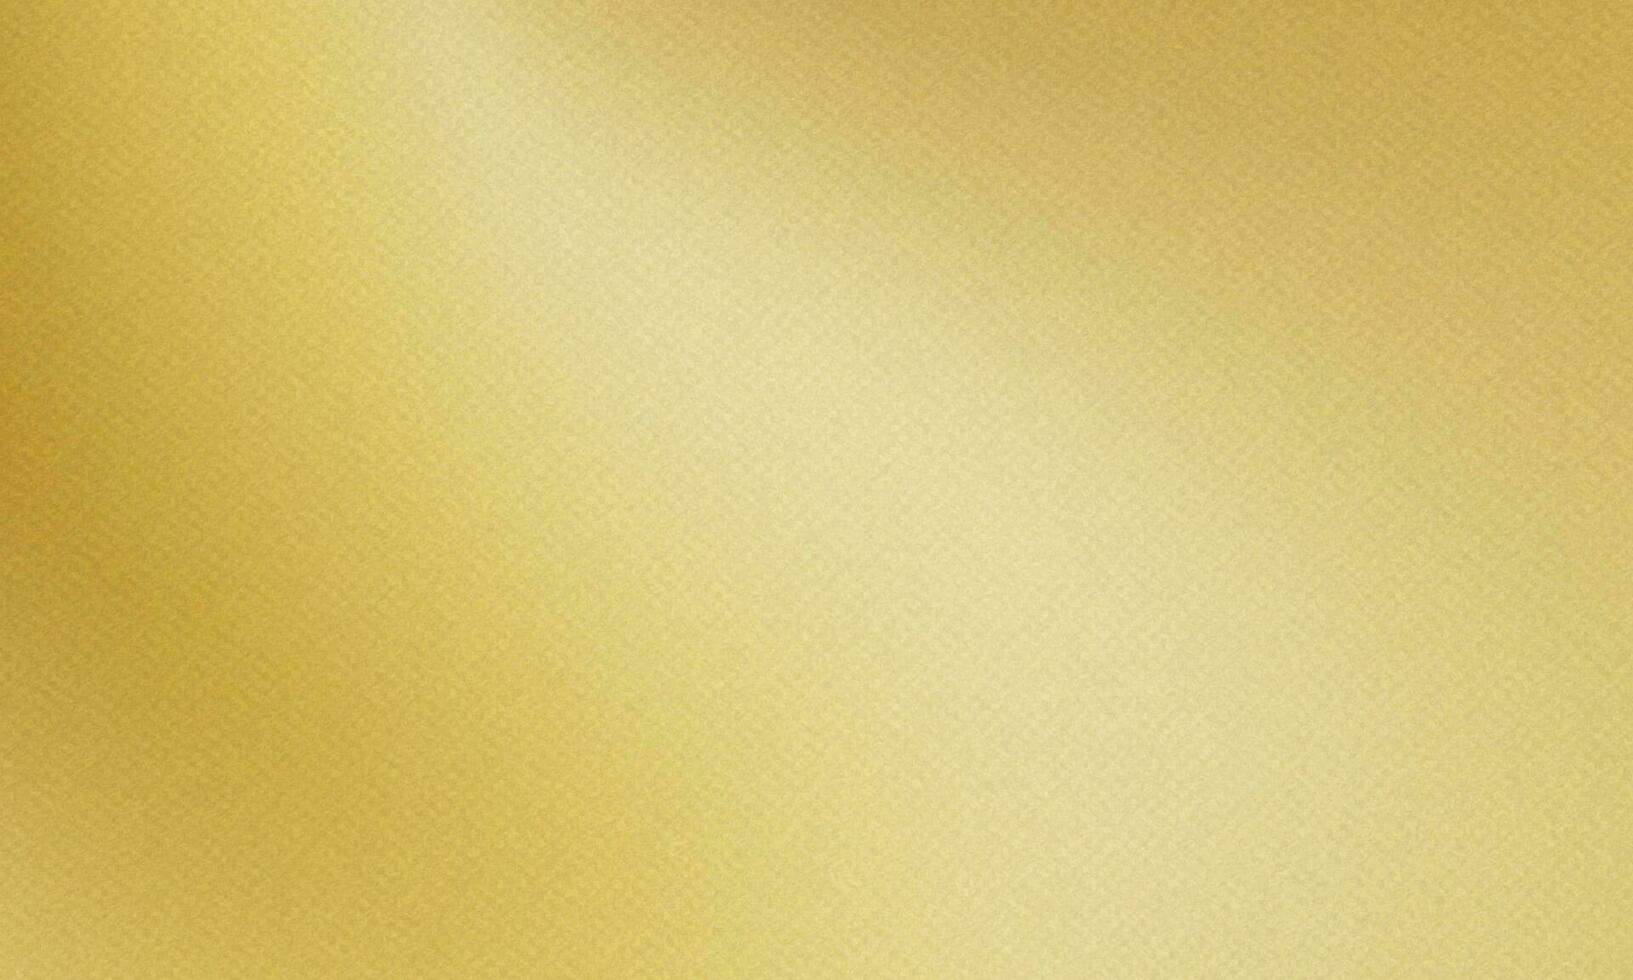 Gold background with paper texture. Vector illustration